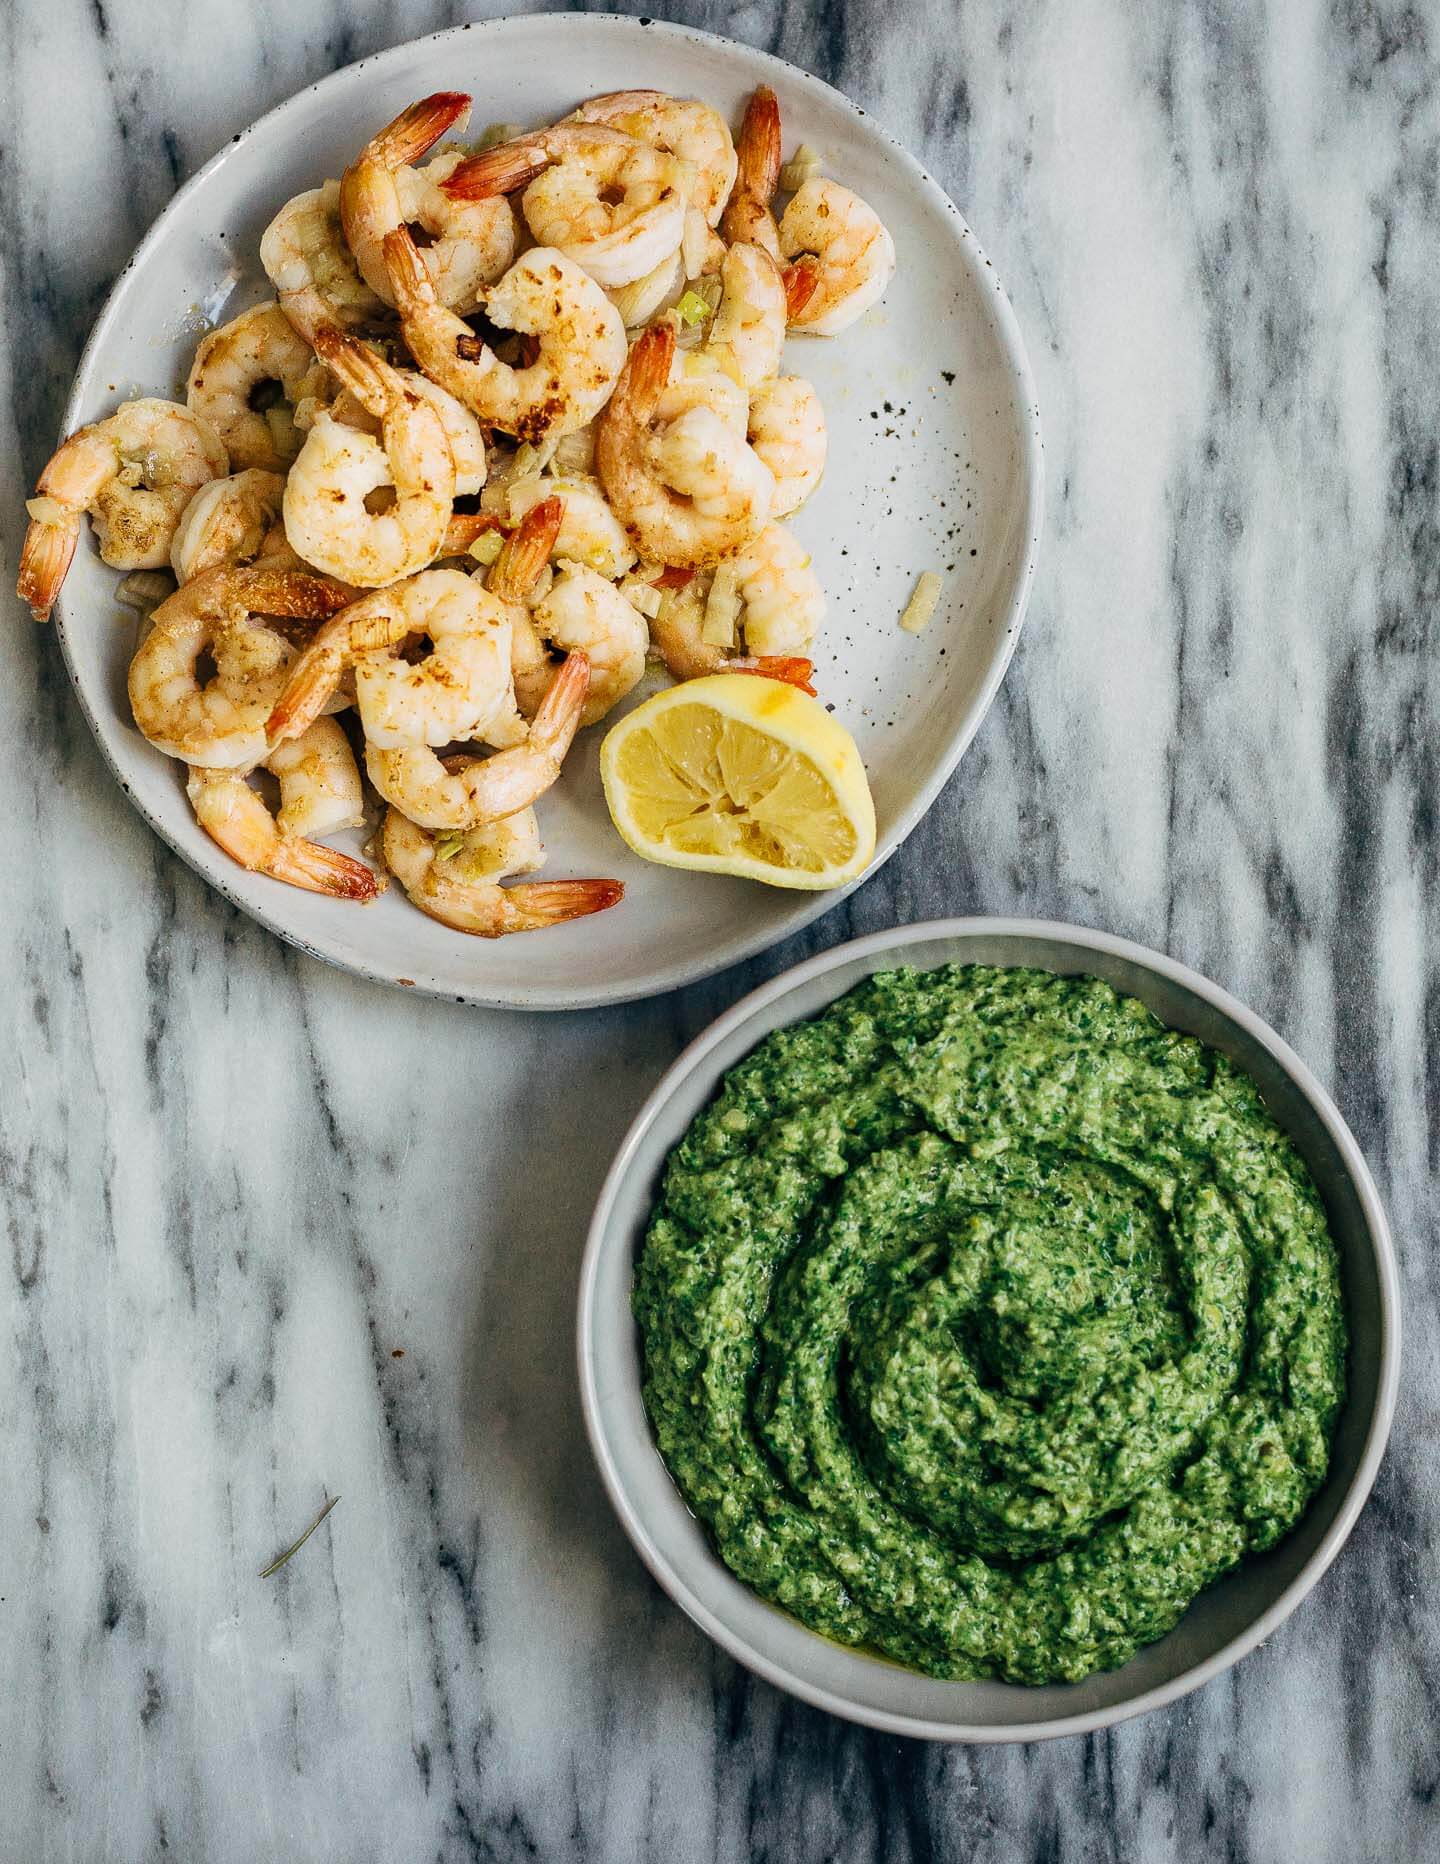 Celebrating the season's first shoots with a vibrant spring onion and chive pesto pasta tossed with sautéed shrimp that's perfect for dinner parties or a quick weeknight meal.